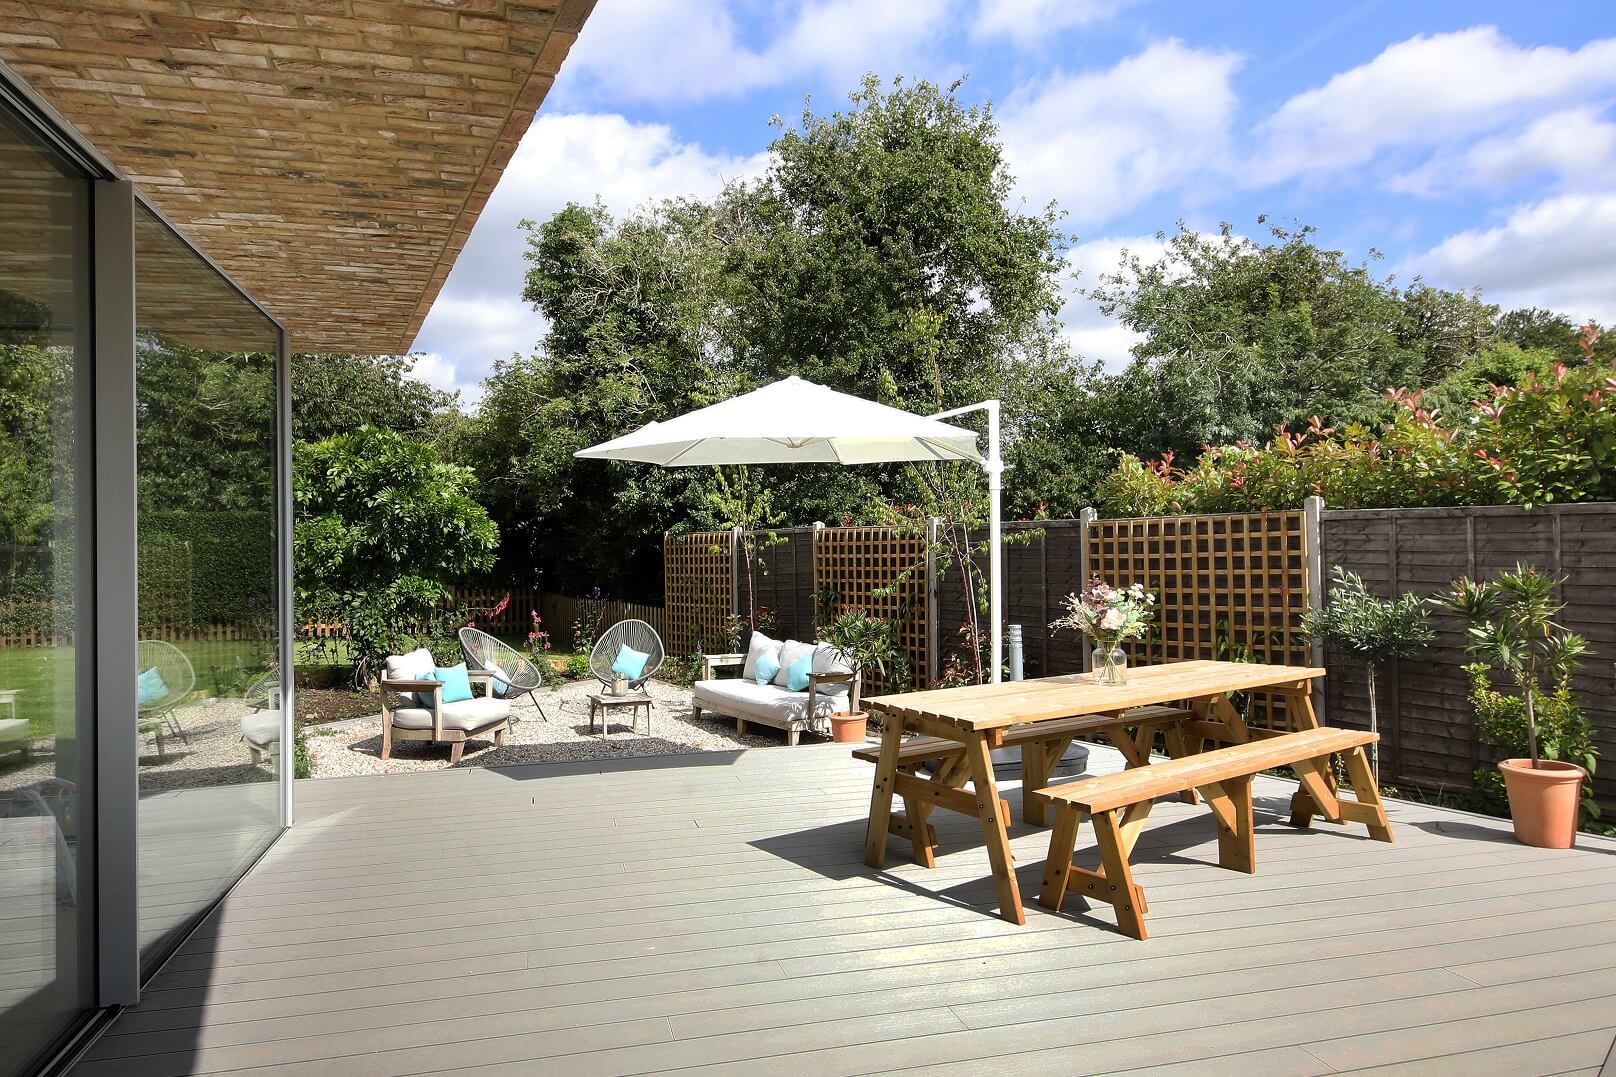 Bovingdon Homes has created this remarkable garden landscape using Cladco Composite Decking in Stone Grey